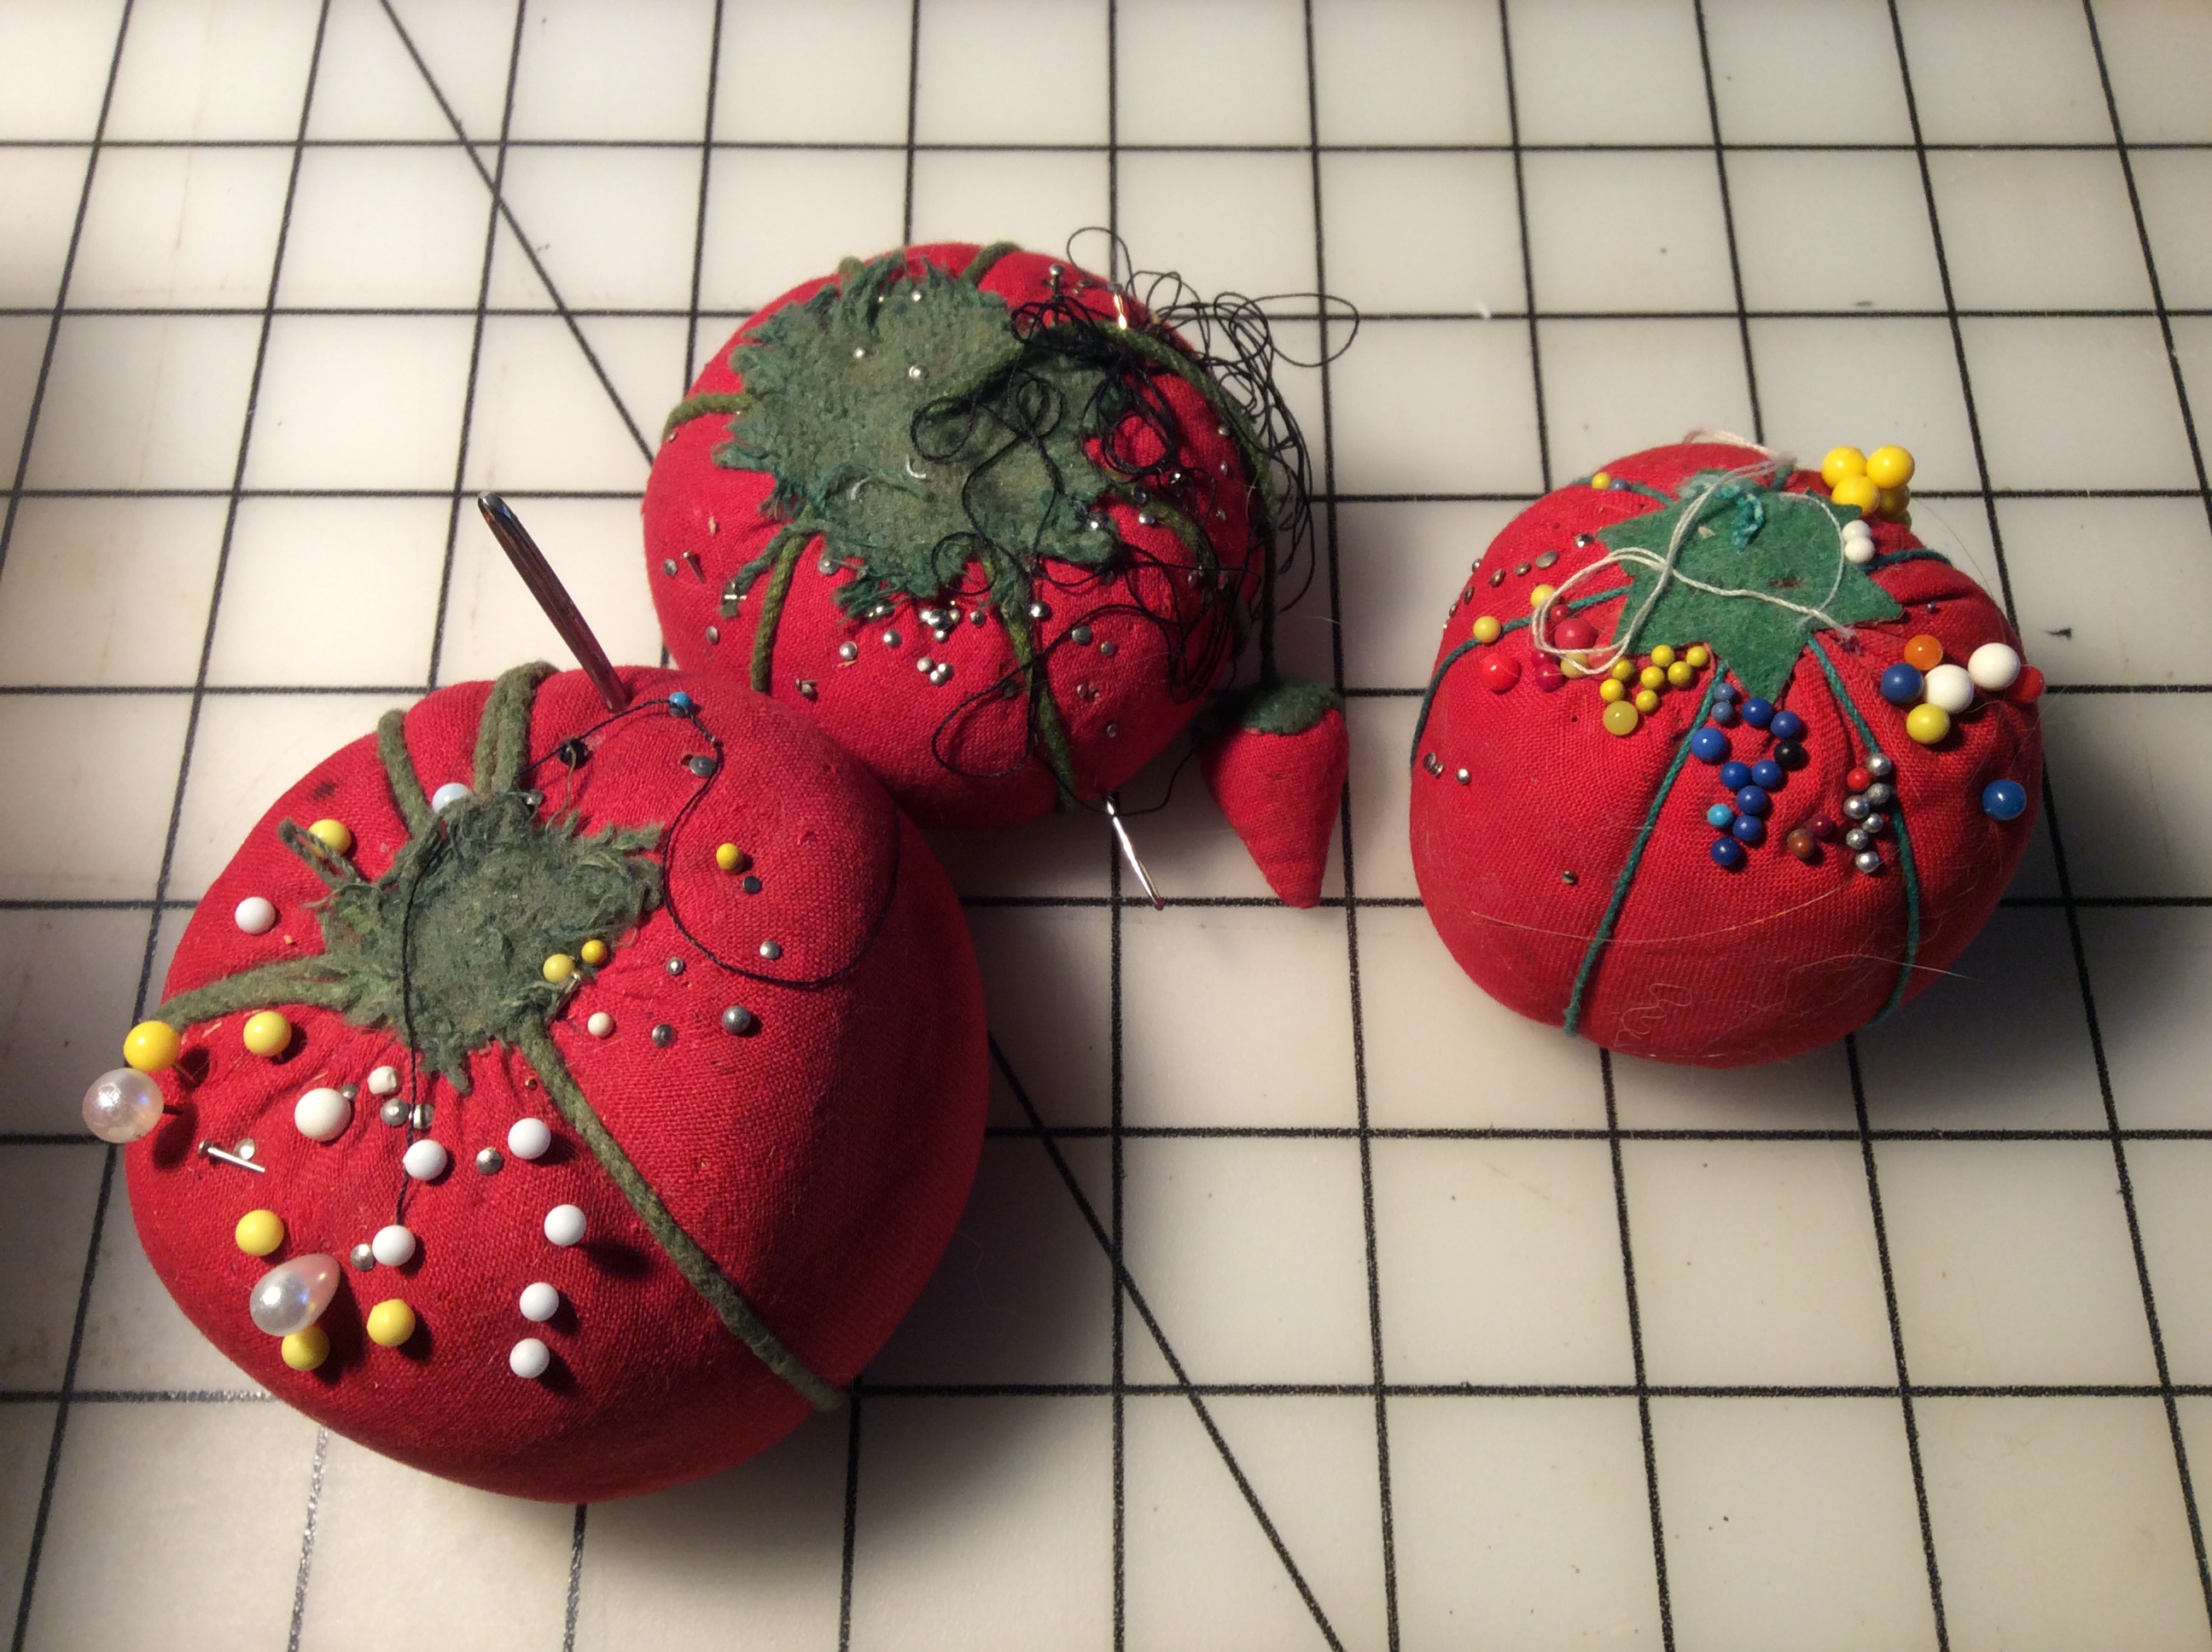 Three tomato-shaped pincushions, one with an attached "strawberry."